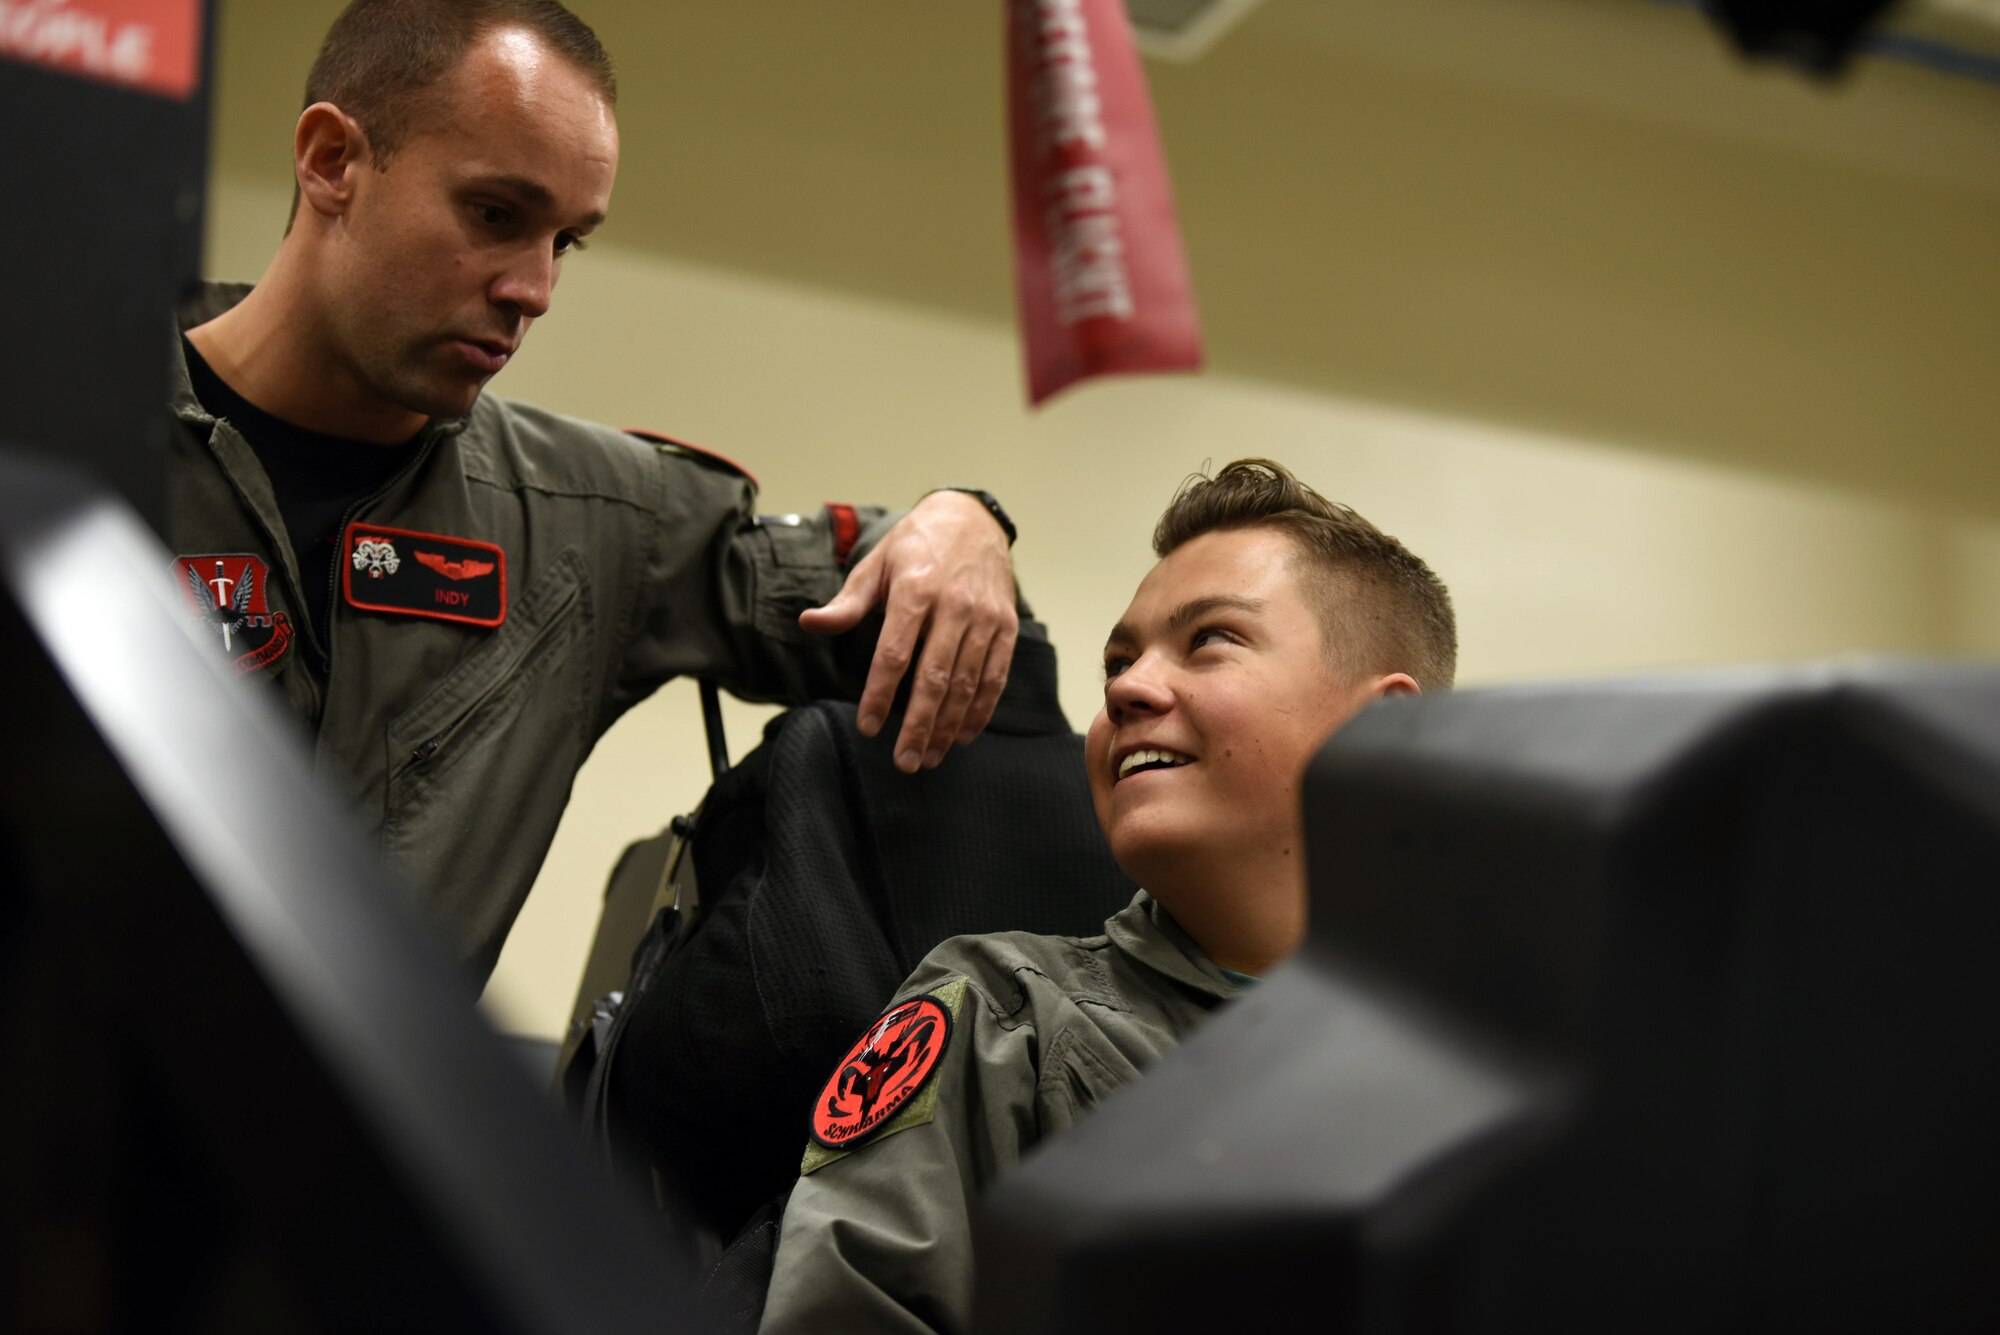 Ethan, with Make-A-Wish Utah is briefed by Capt. Buck Horn in an F-35A Lightning II egress trainer at Hill Air Force Base, Utah. A group of children visited the 388th Fighter Wing where they spent the day learning what it's like to be a pilot. They received flight suits, name tapes, patches, and wings. (U.S. Air Force photo by Micah Garbarino)